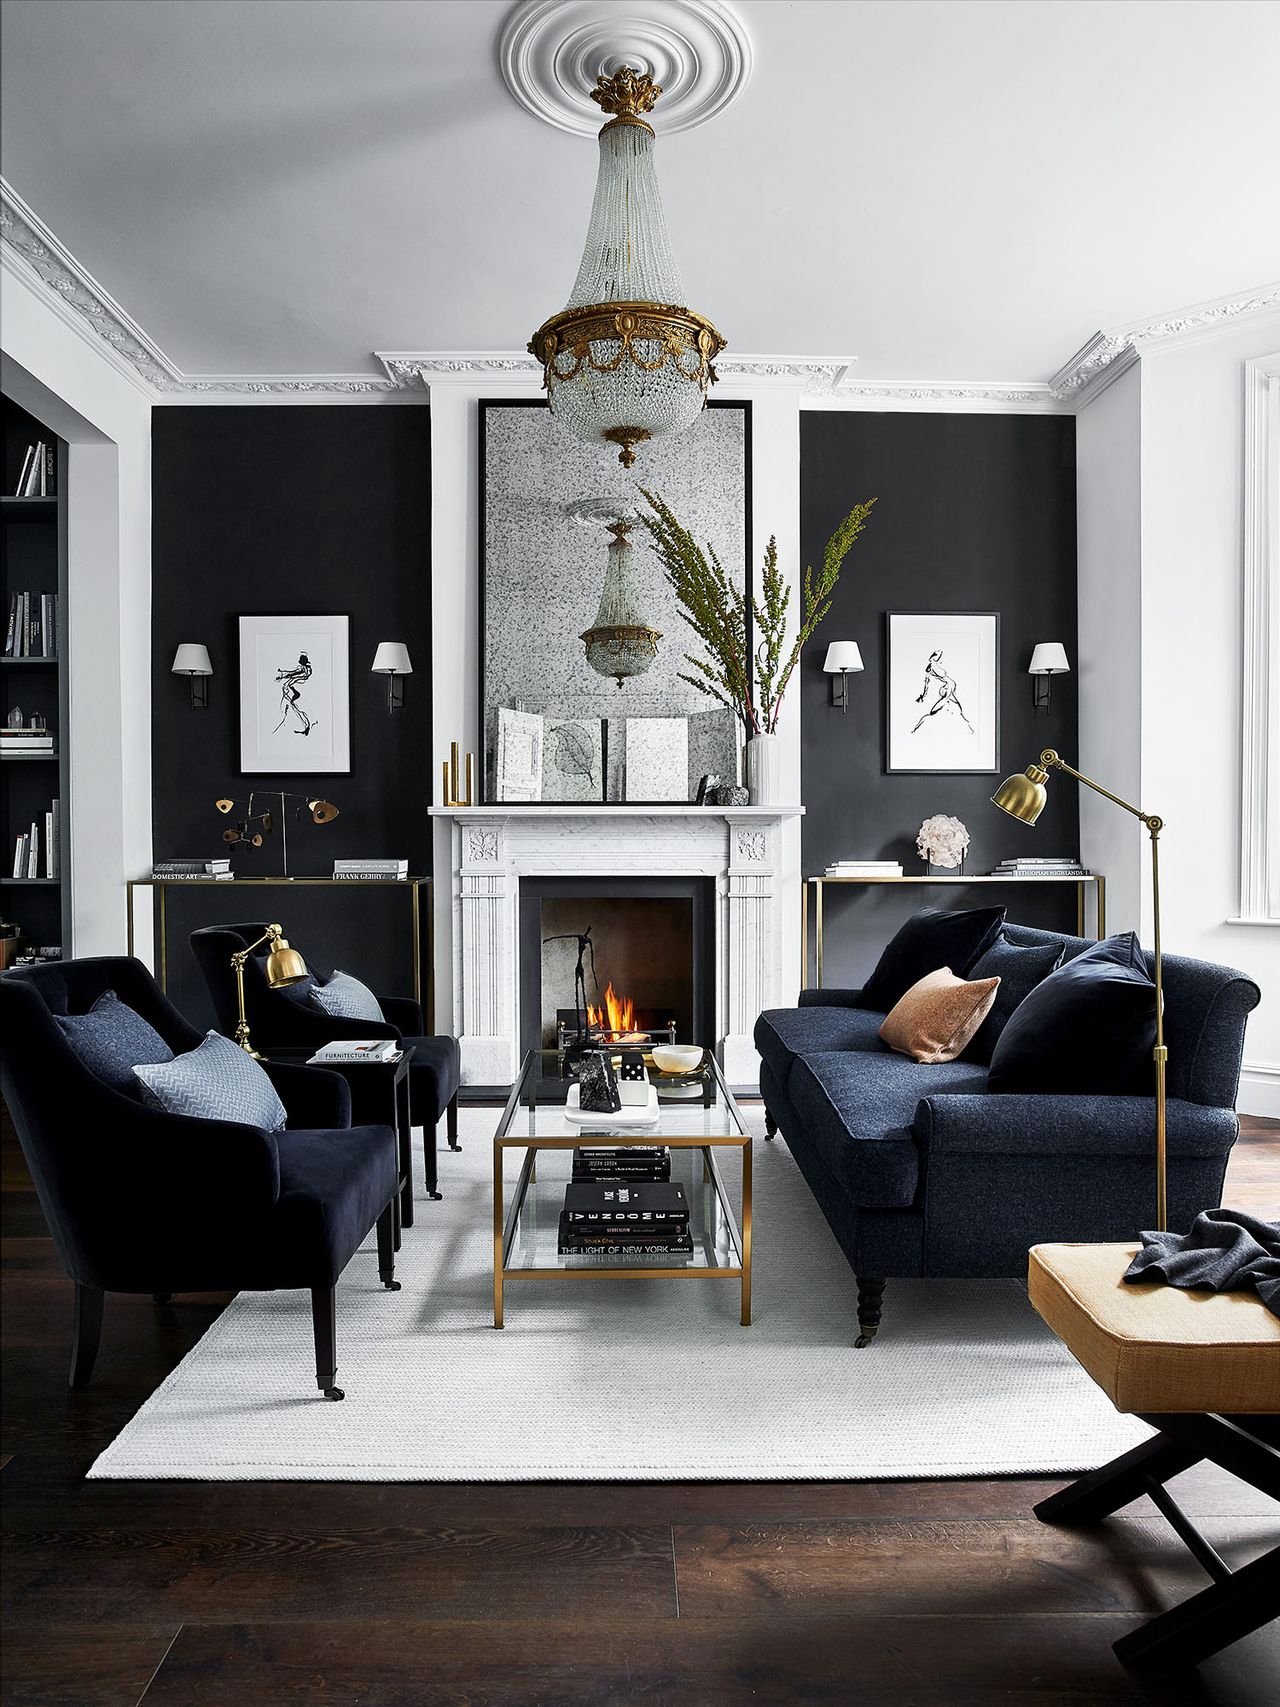 16 black living room ideas to tempt you over to the dark side | Real Homes